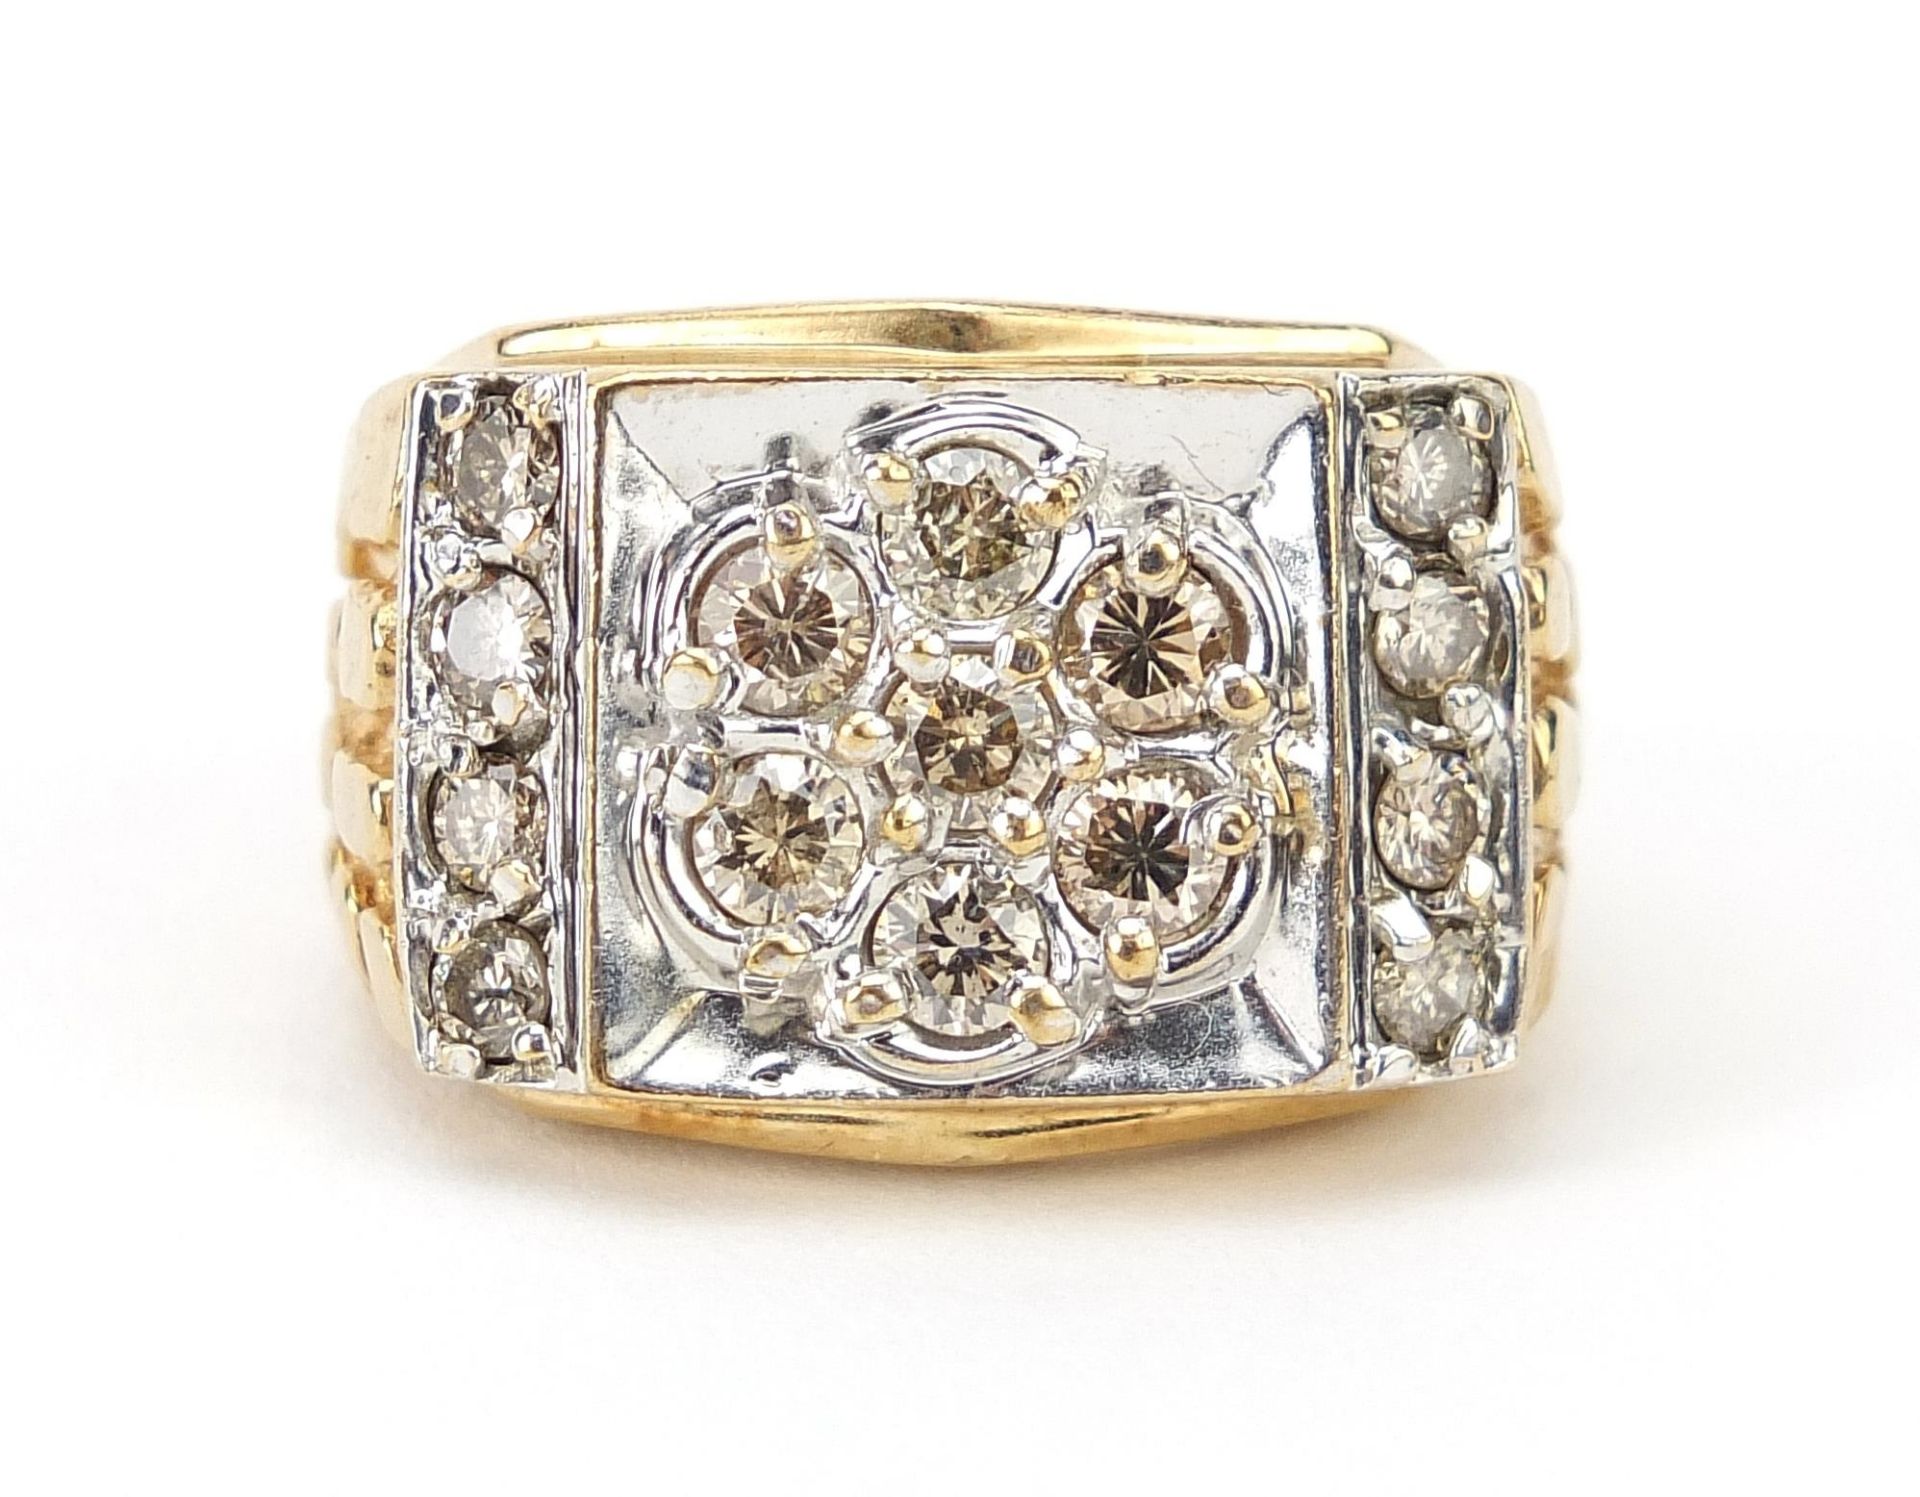 14ct two tone gold Champagne diamond ring, each diamond between 0.3 and 0.4ct each, size U/V, 12.6g